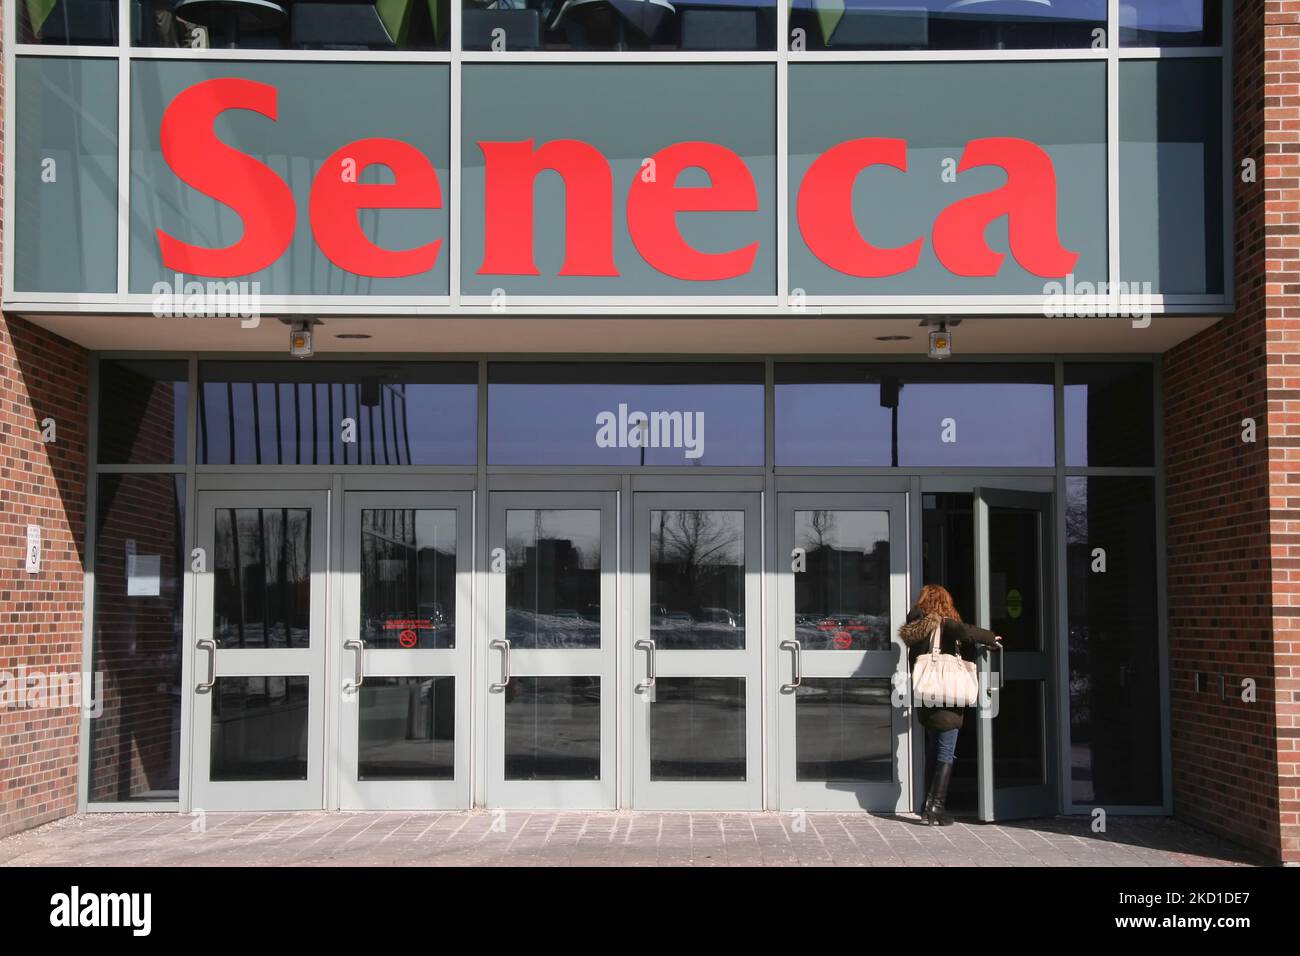 Student entering the Stephen E. Quinlan Building at the Seneca College campus at York University in Toronto, Canada. Several schools are located at this Toronto campus, including Creative Arts and Animation, Biological Sciences & Applied Chemistry, English and Liberal Studies and Information and Communications Technology. Seneca College of Applied Arts and Technology is a post-secondary educational institution in Toronto, Ontario offering programs at the baccalaureate, diploma, certificate and post-graduate levels. (Photo by Creative Touch Imaging Ltd./NurPhoto) Stock Photo